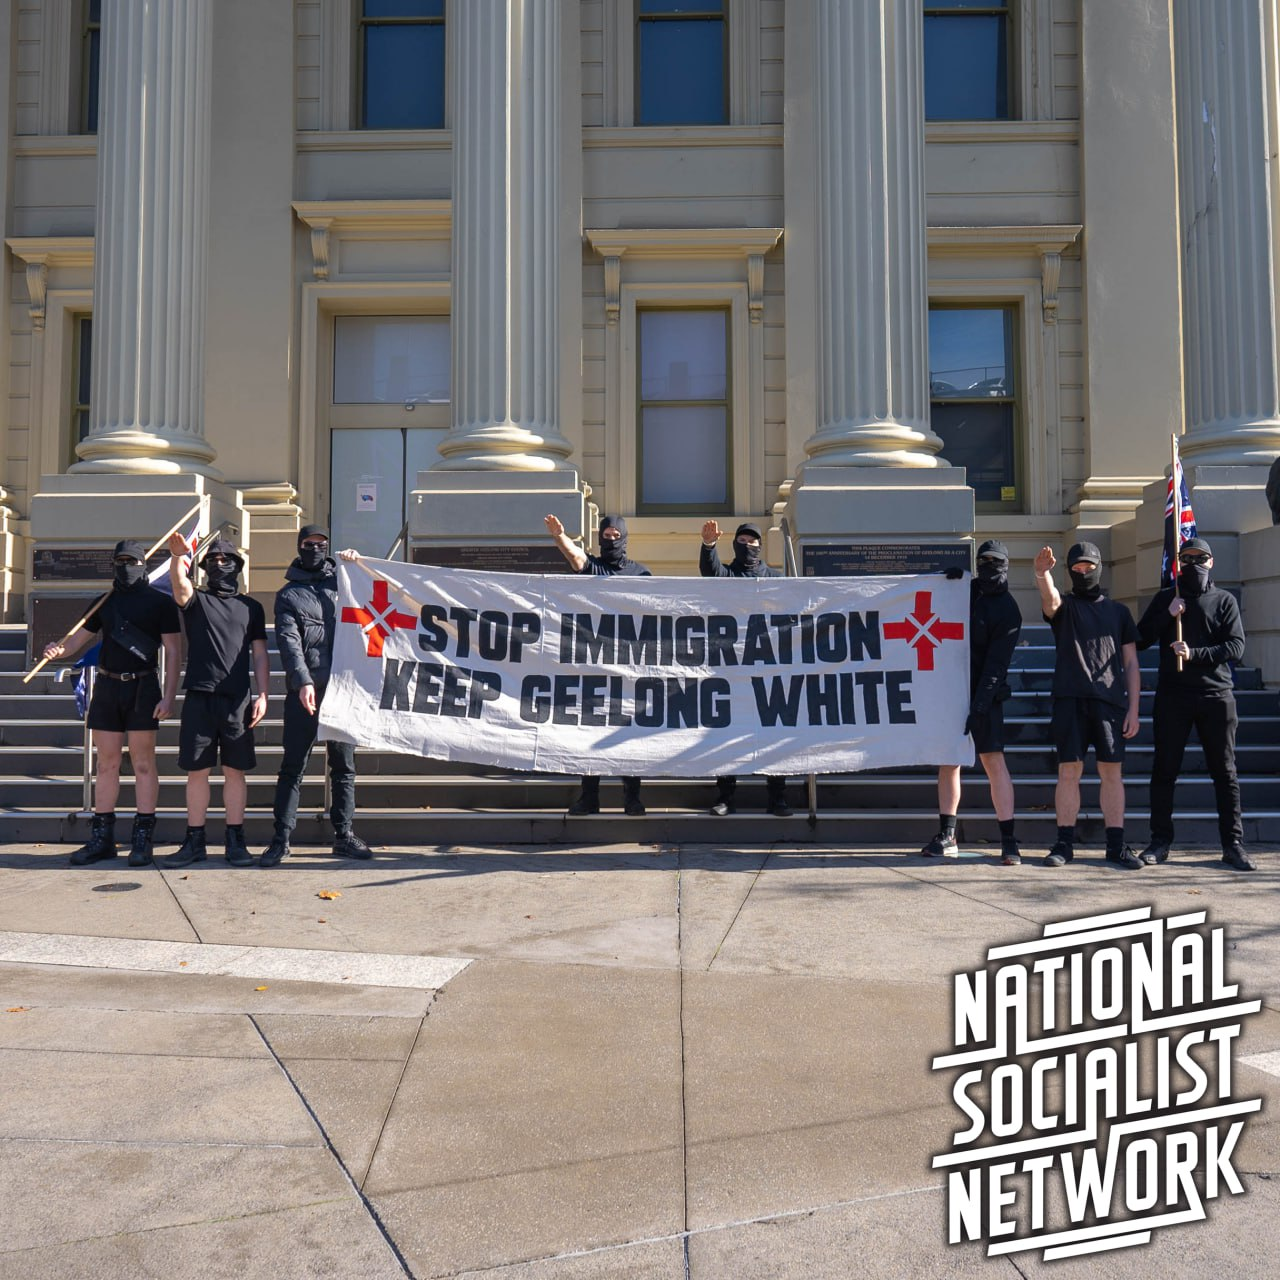 Neo-Nazi Group National Socialist Network (NSN) Perform Sieg Heil During Anti-Immigration Protest in Geelong, Victoria, Australia